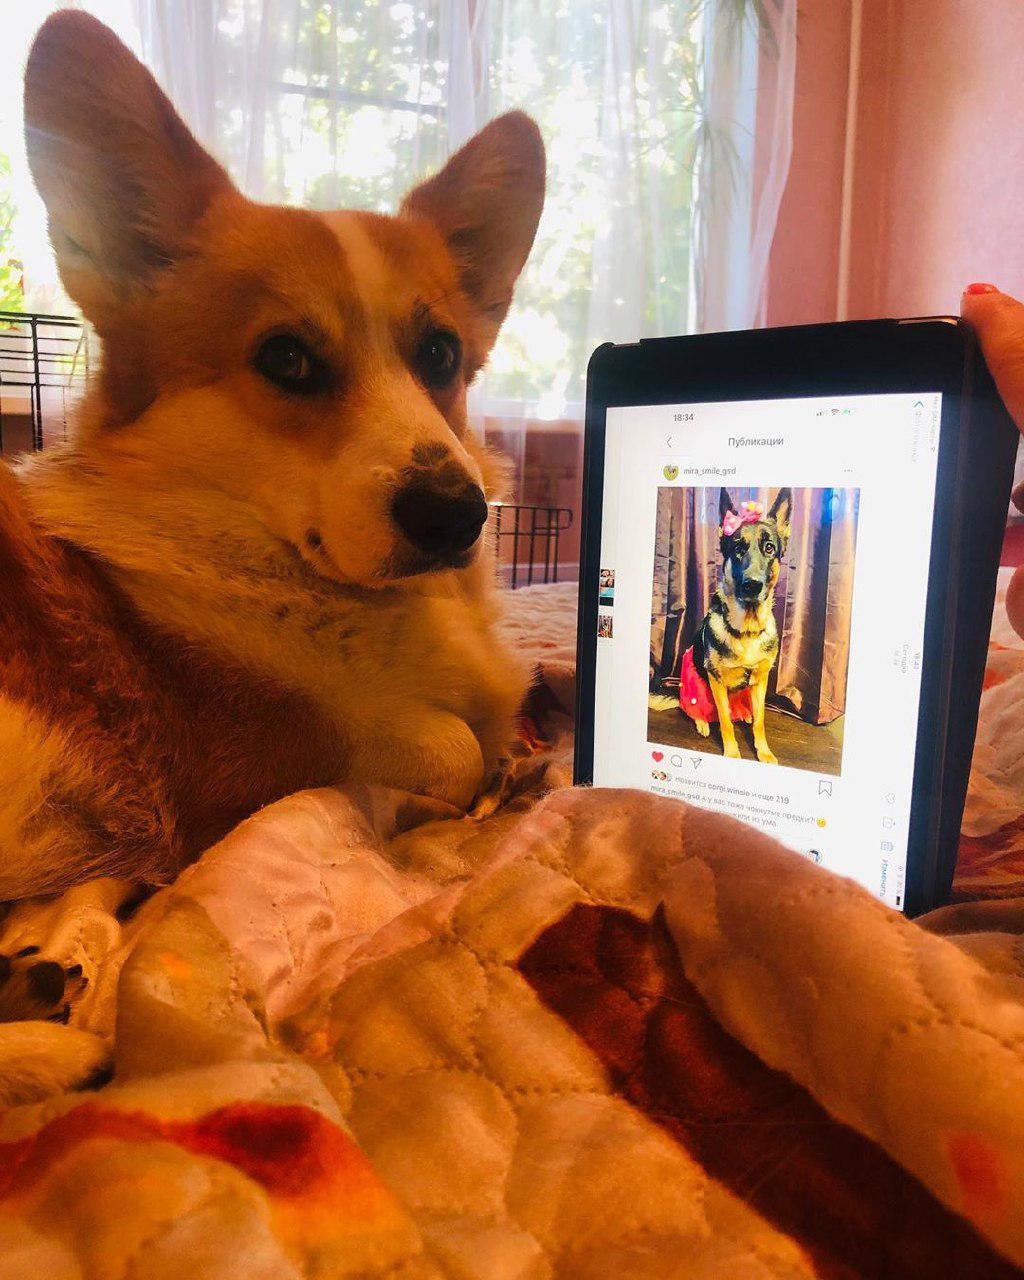 Corgi on the bed staring at his owner with a tablet showing an instagram photo of a German Shepherd